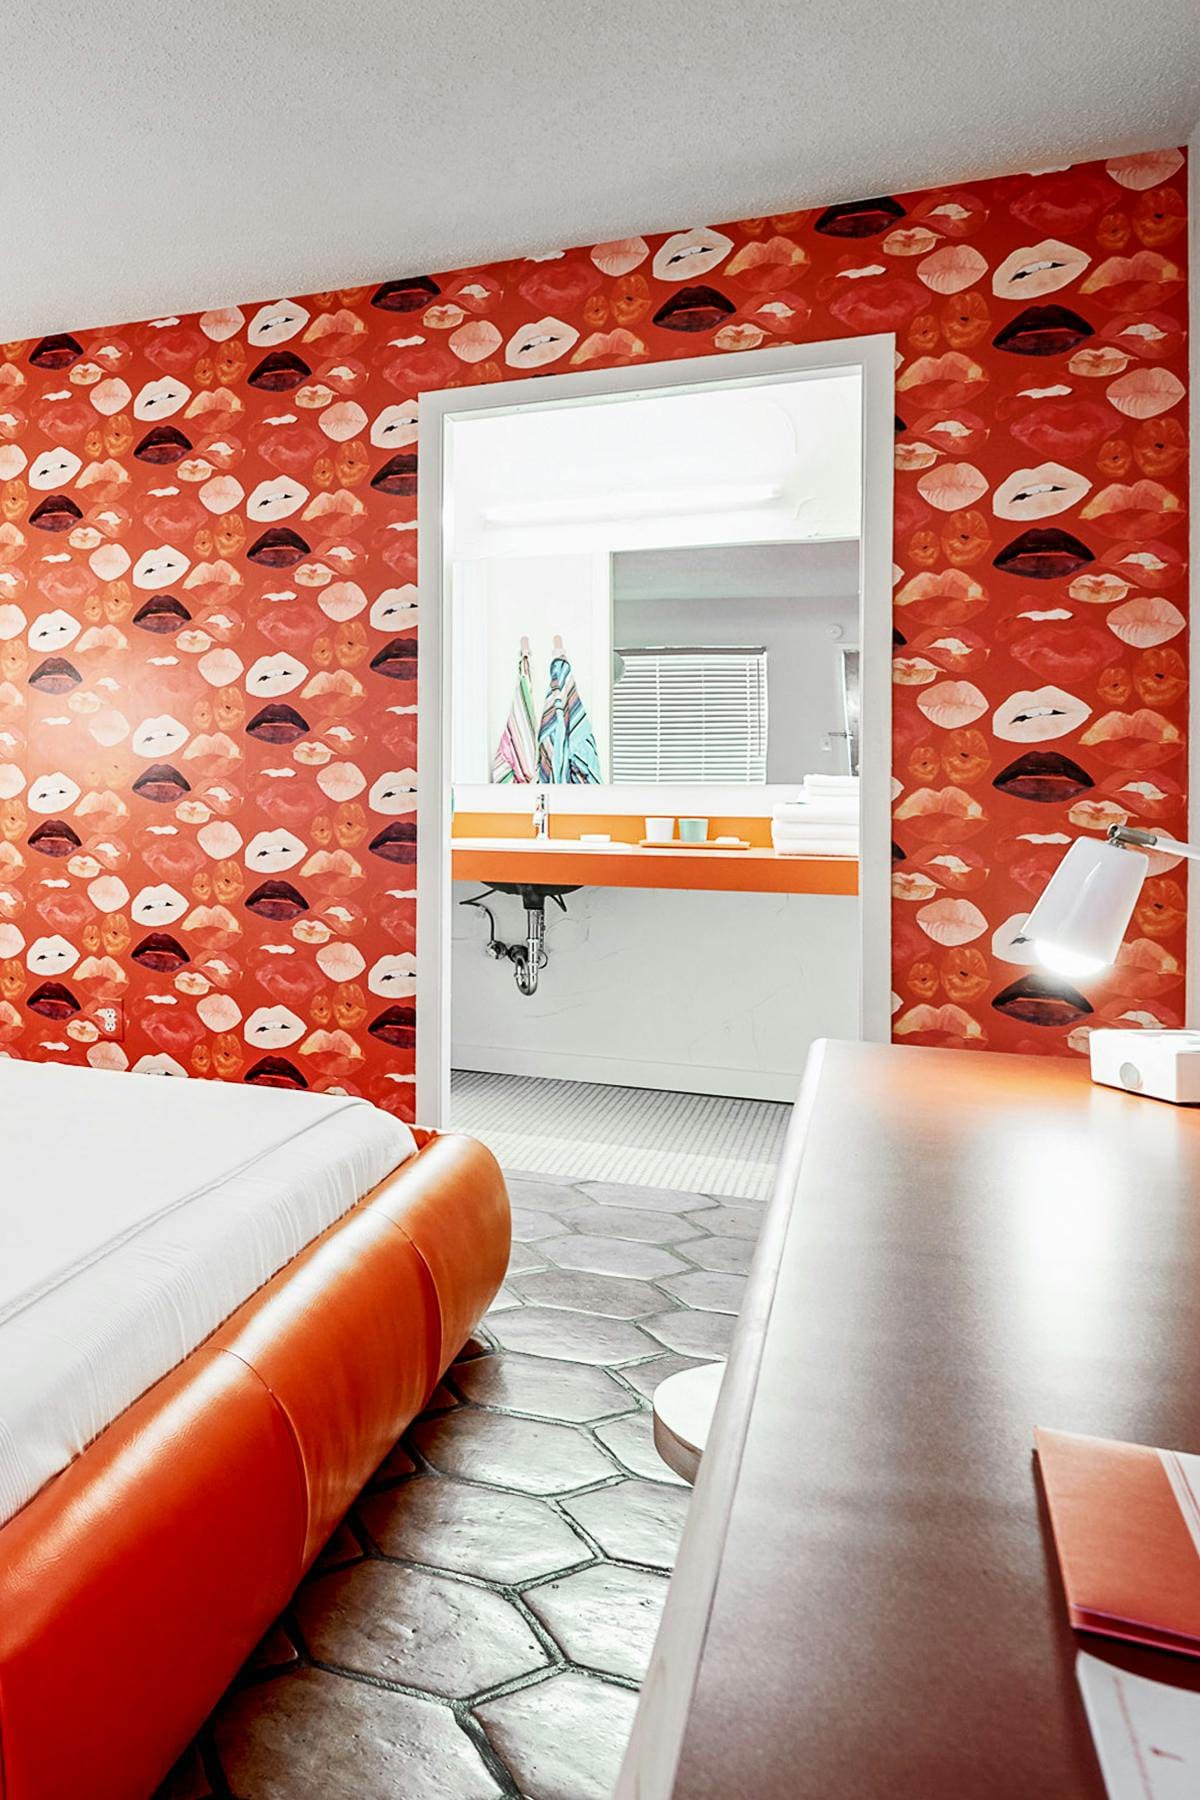 Cheeky throwback design in restyled classic motel